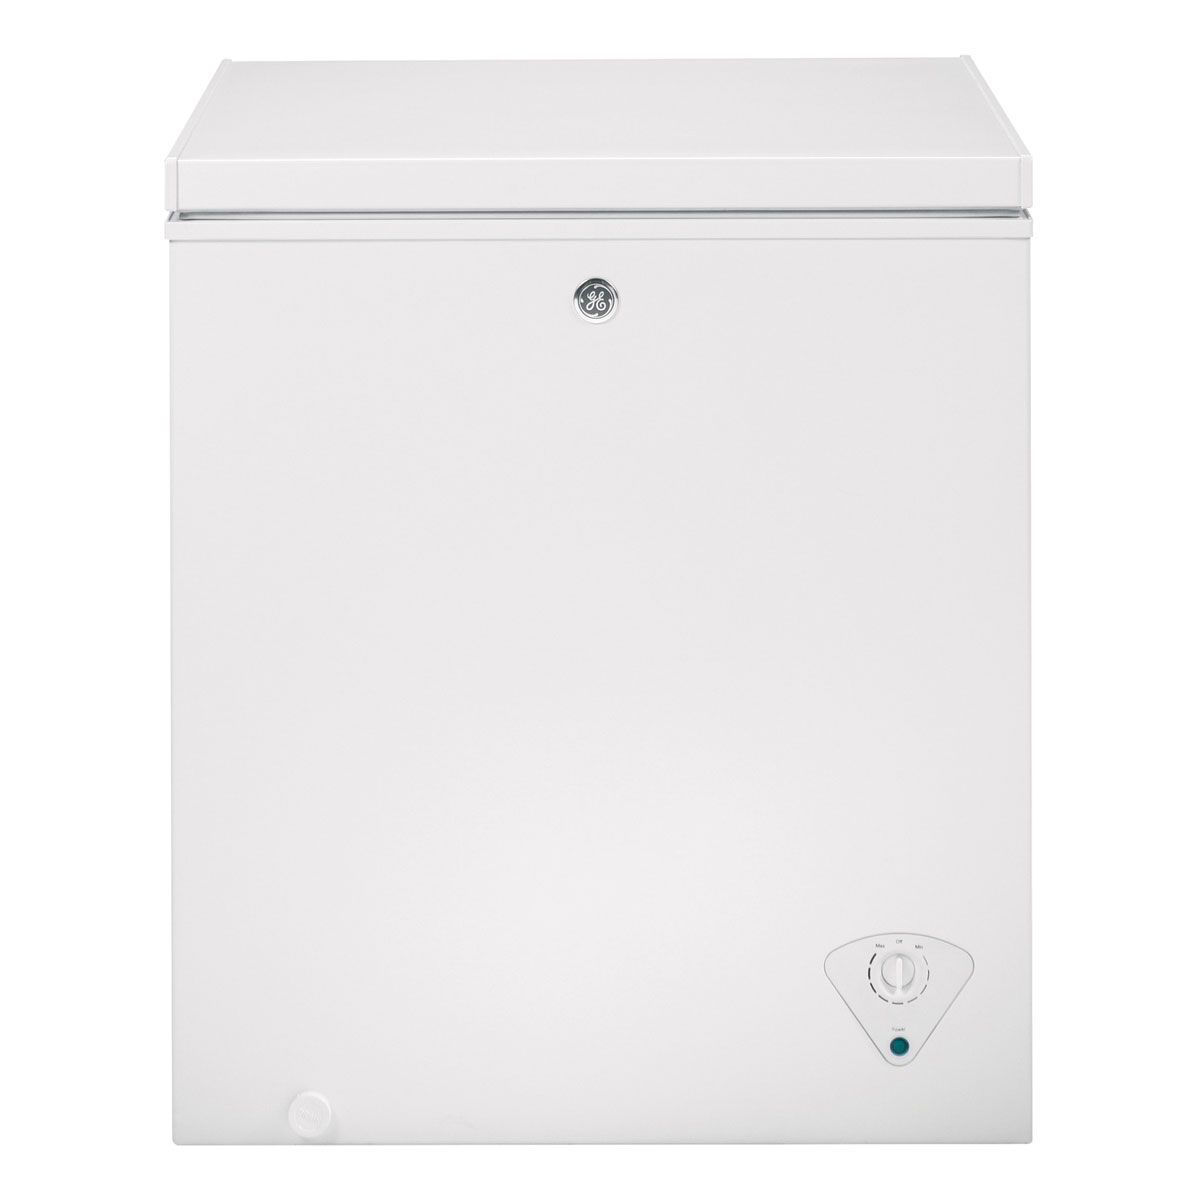 Picture of GE 5 CU FT CHEST FREEZER